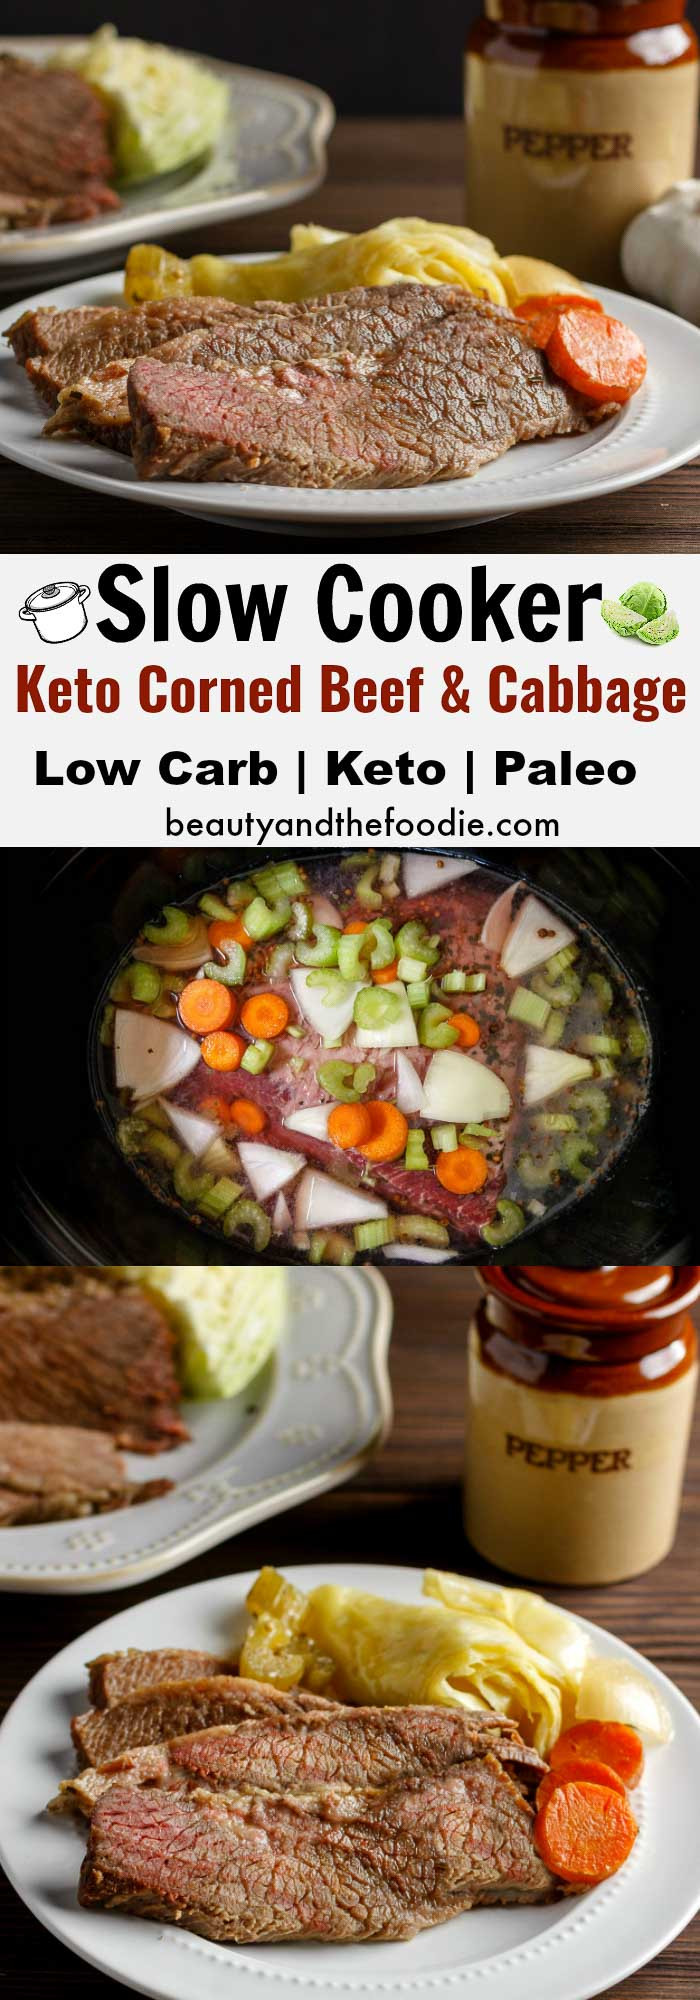 Low Carb Corned Beef And Cabbage
 Slow Cooker Keto Corned Beef Cabbage